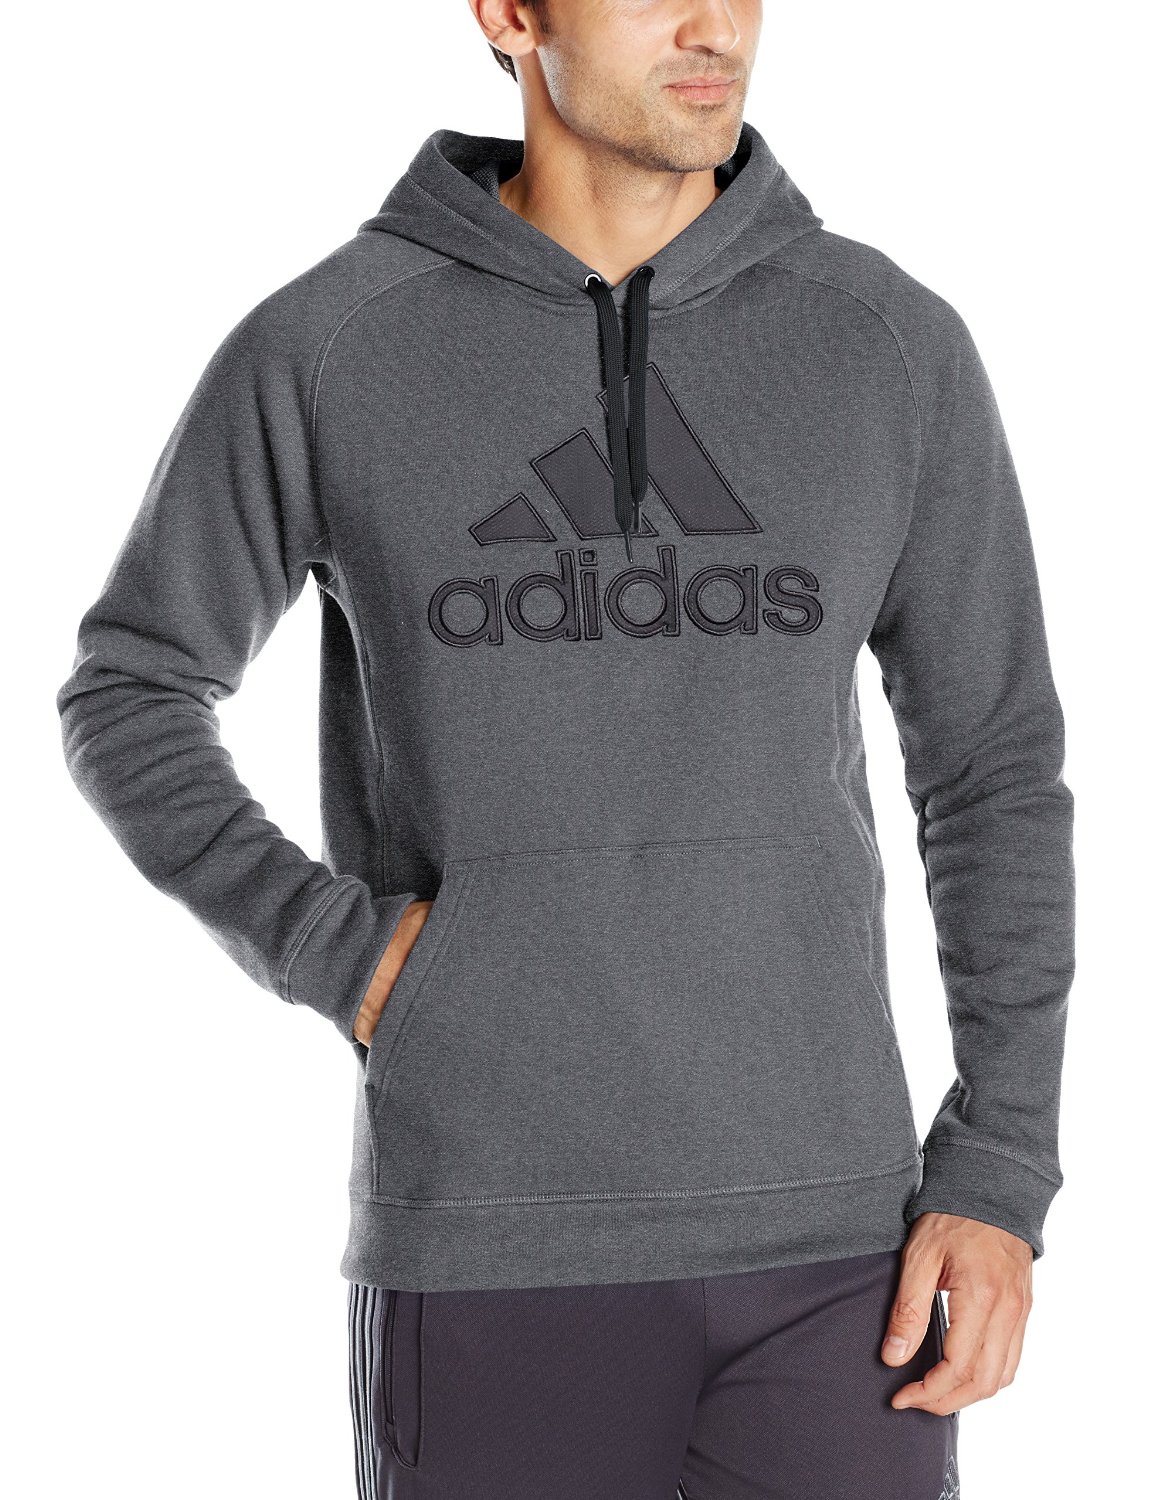 Up to 50% Off Select adidas Training Clothing!